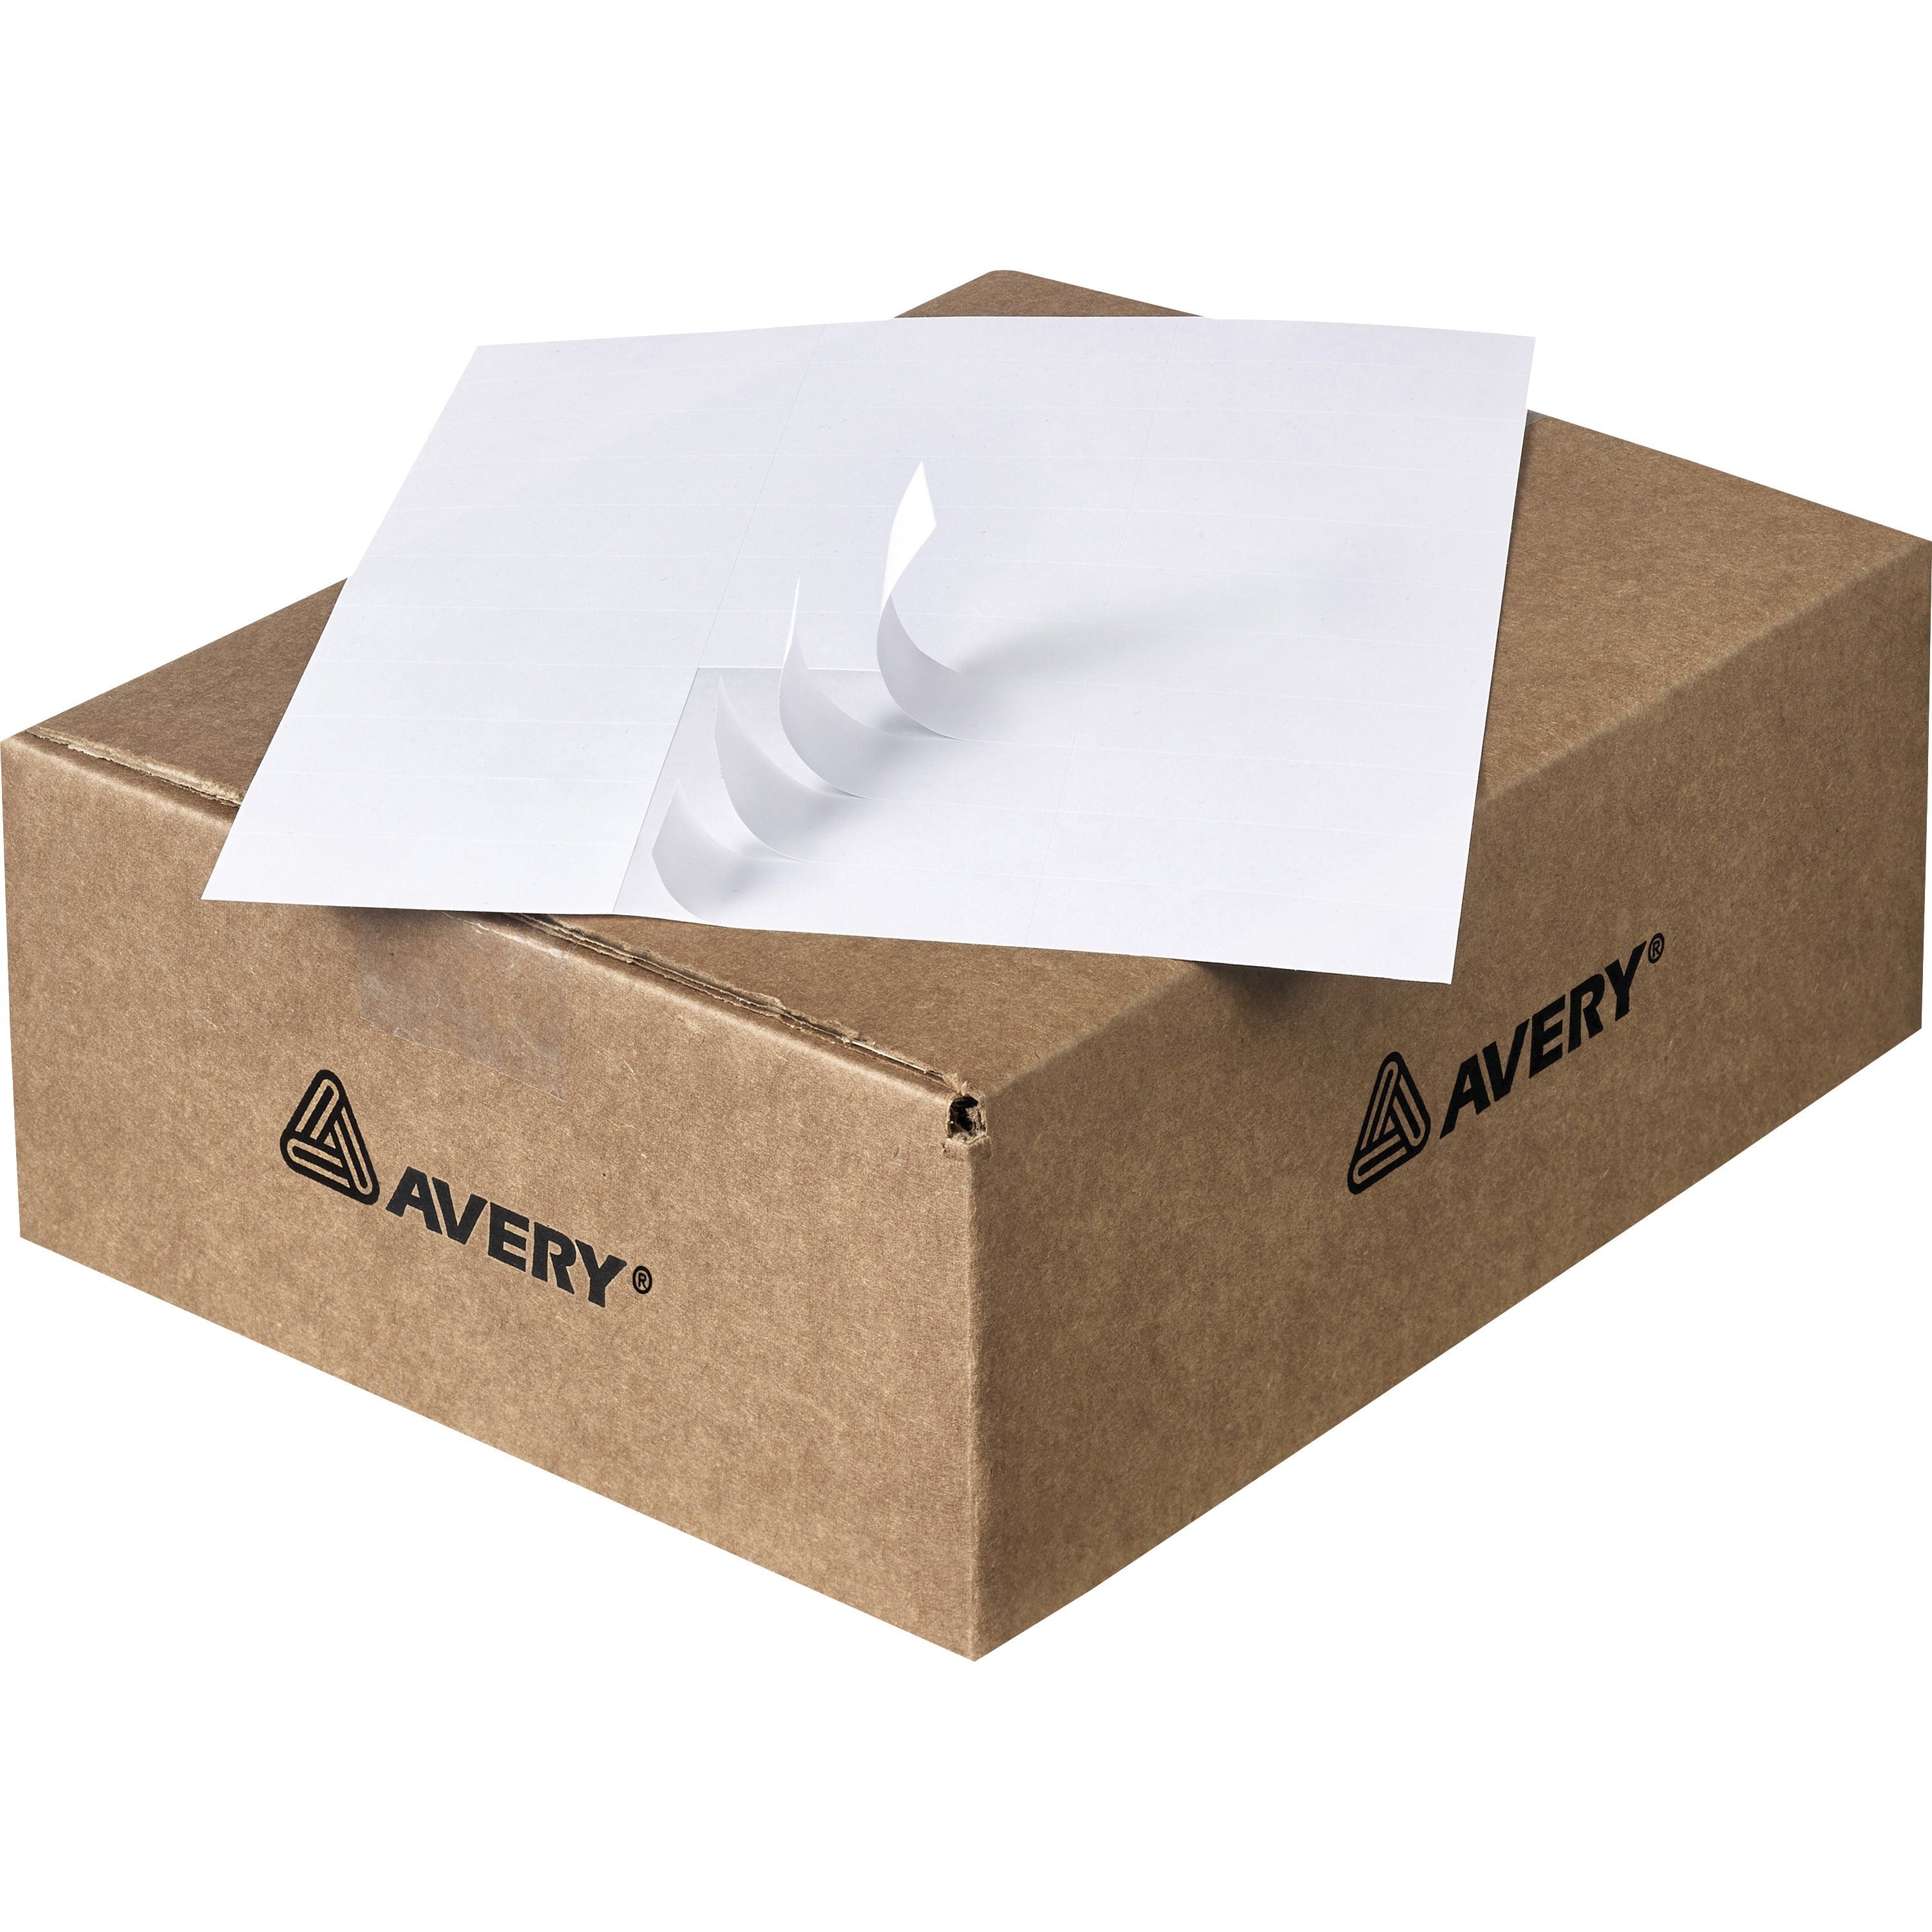 avery-address-label-3-2-5-height-x-9-width-x-11-1-5-length-permanent-adhesive-rectangle-matte-white-paper-33-sheet-500-total-sheets-16500-total-labels-1-carton_ave05334 - 1